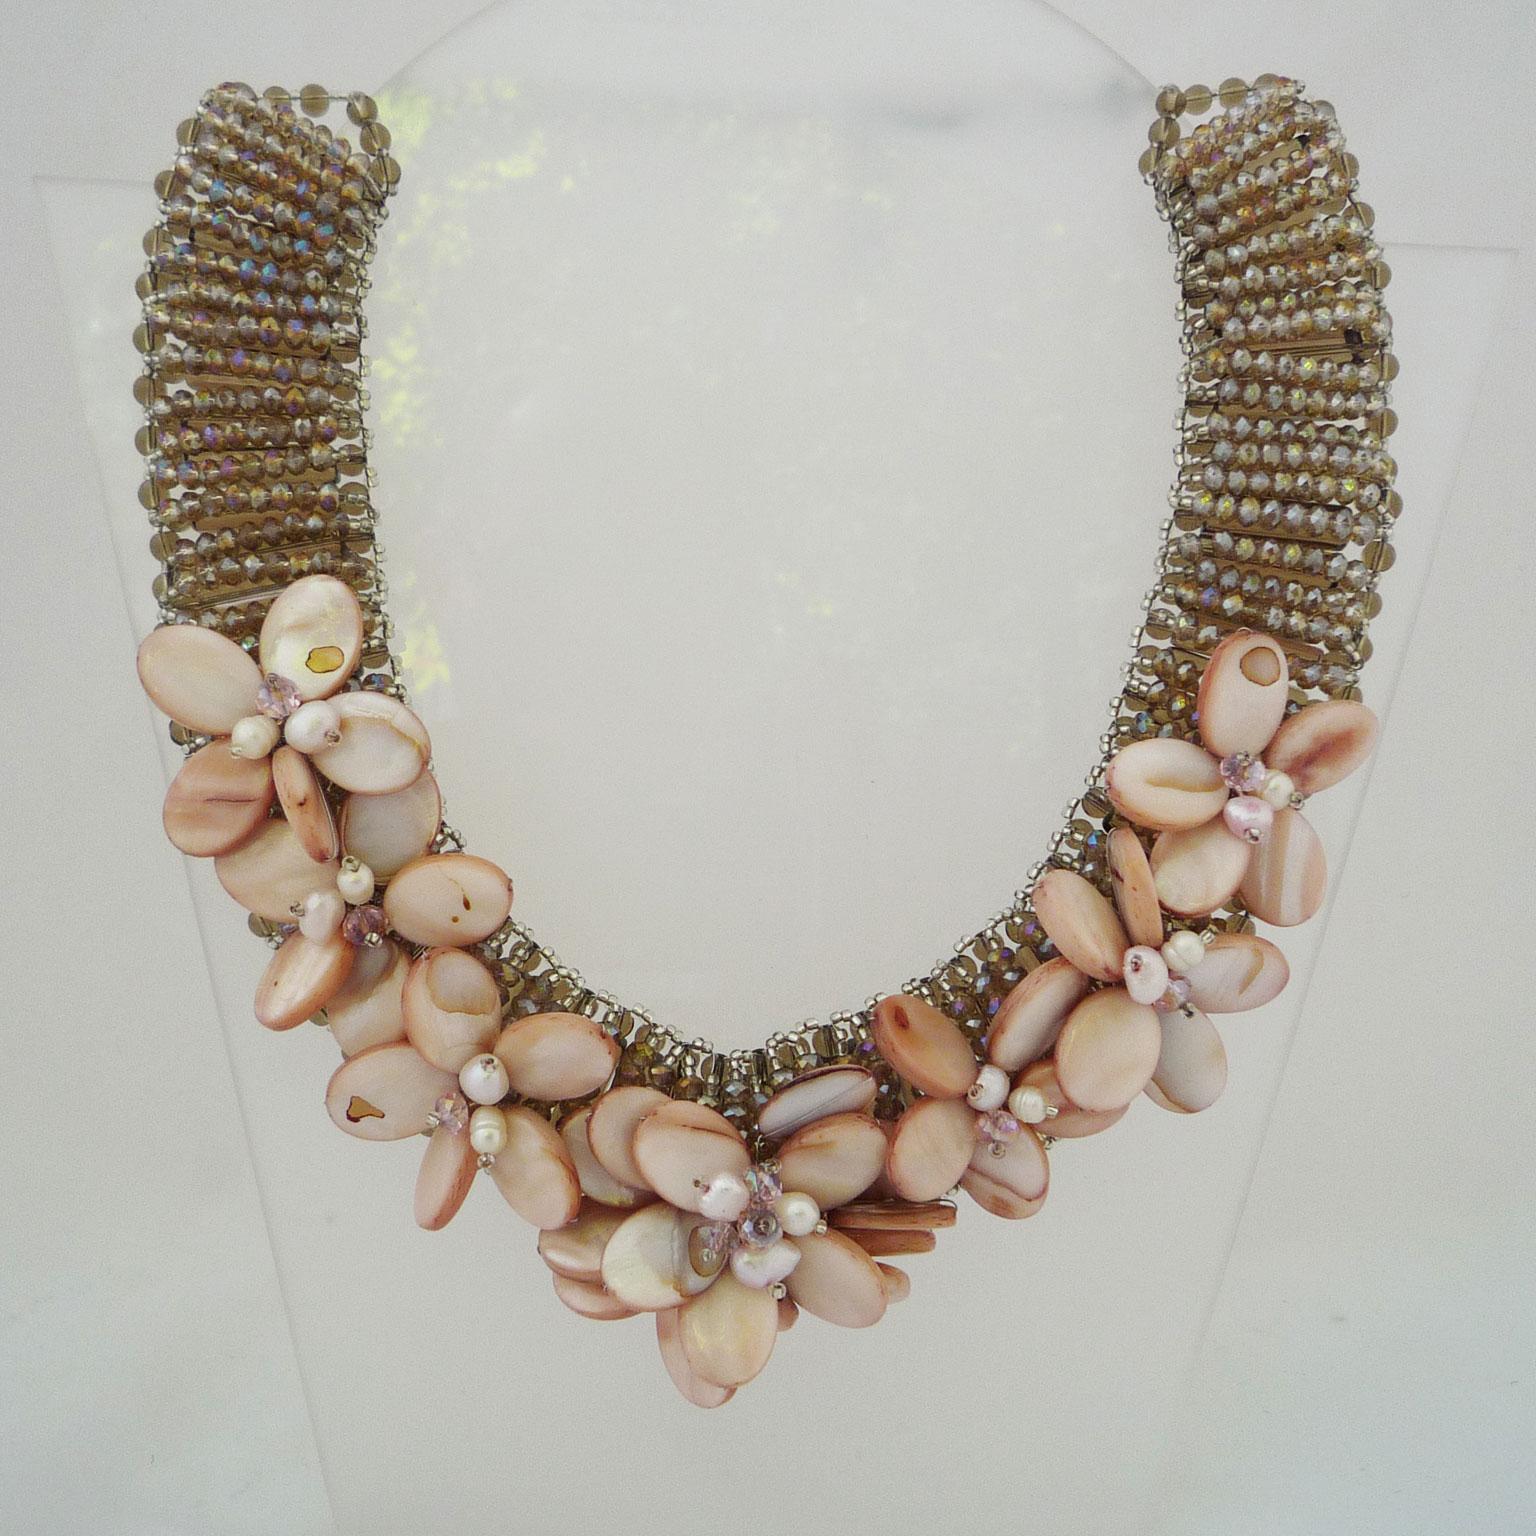 Modern Necklace made of mother-of-pearl, freshwater pearls and Swarovski pearls